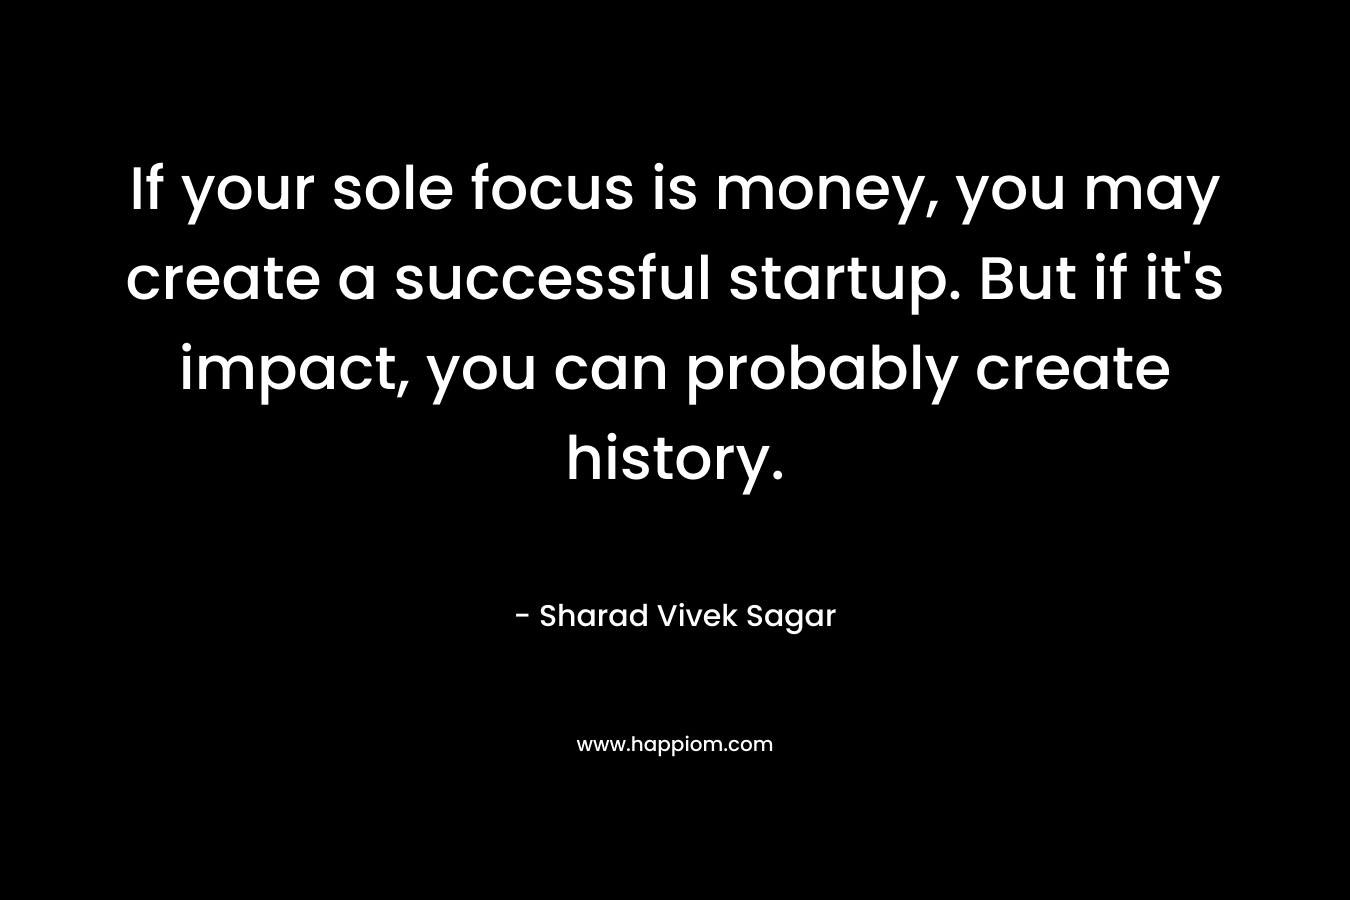 If your sole focus is money, you may create a successful startup. But if it's impact, you can probably create history.